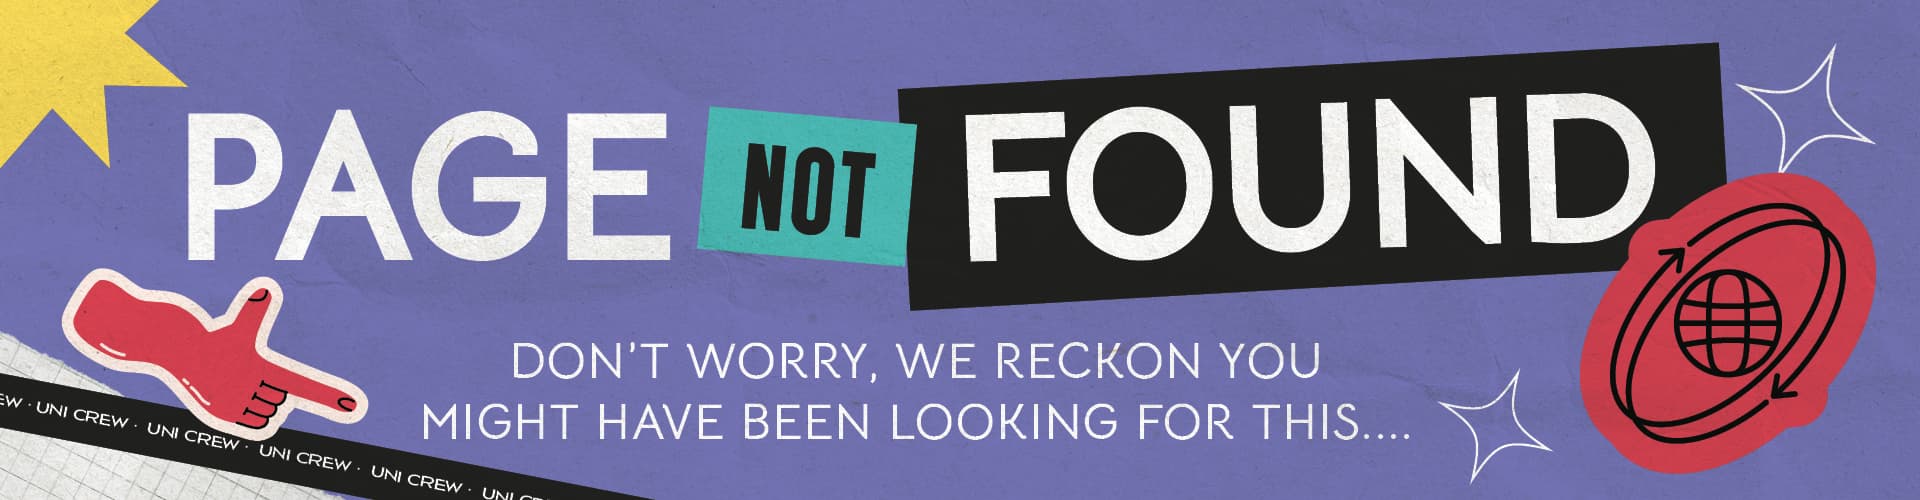 Page not found - don't worry, we reckon you might have been looking for this